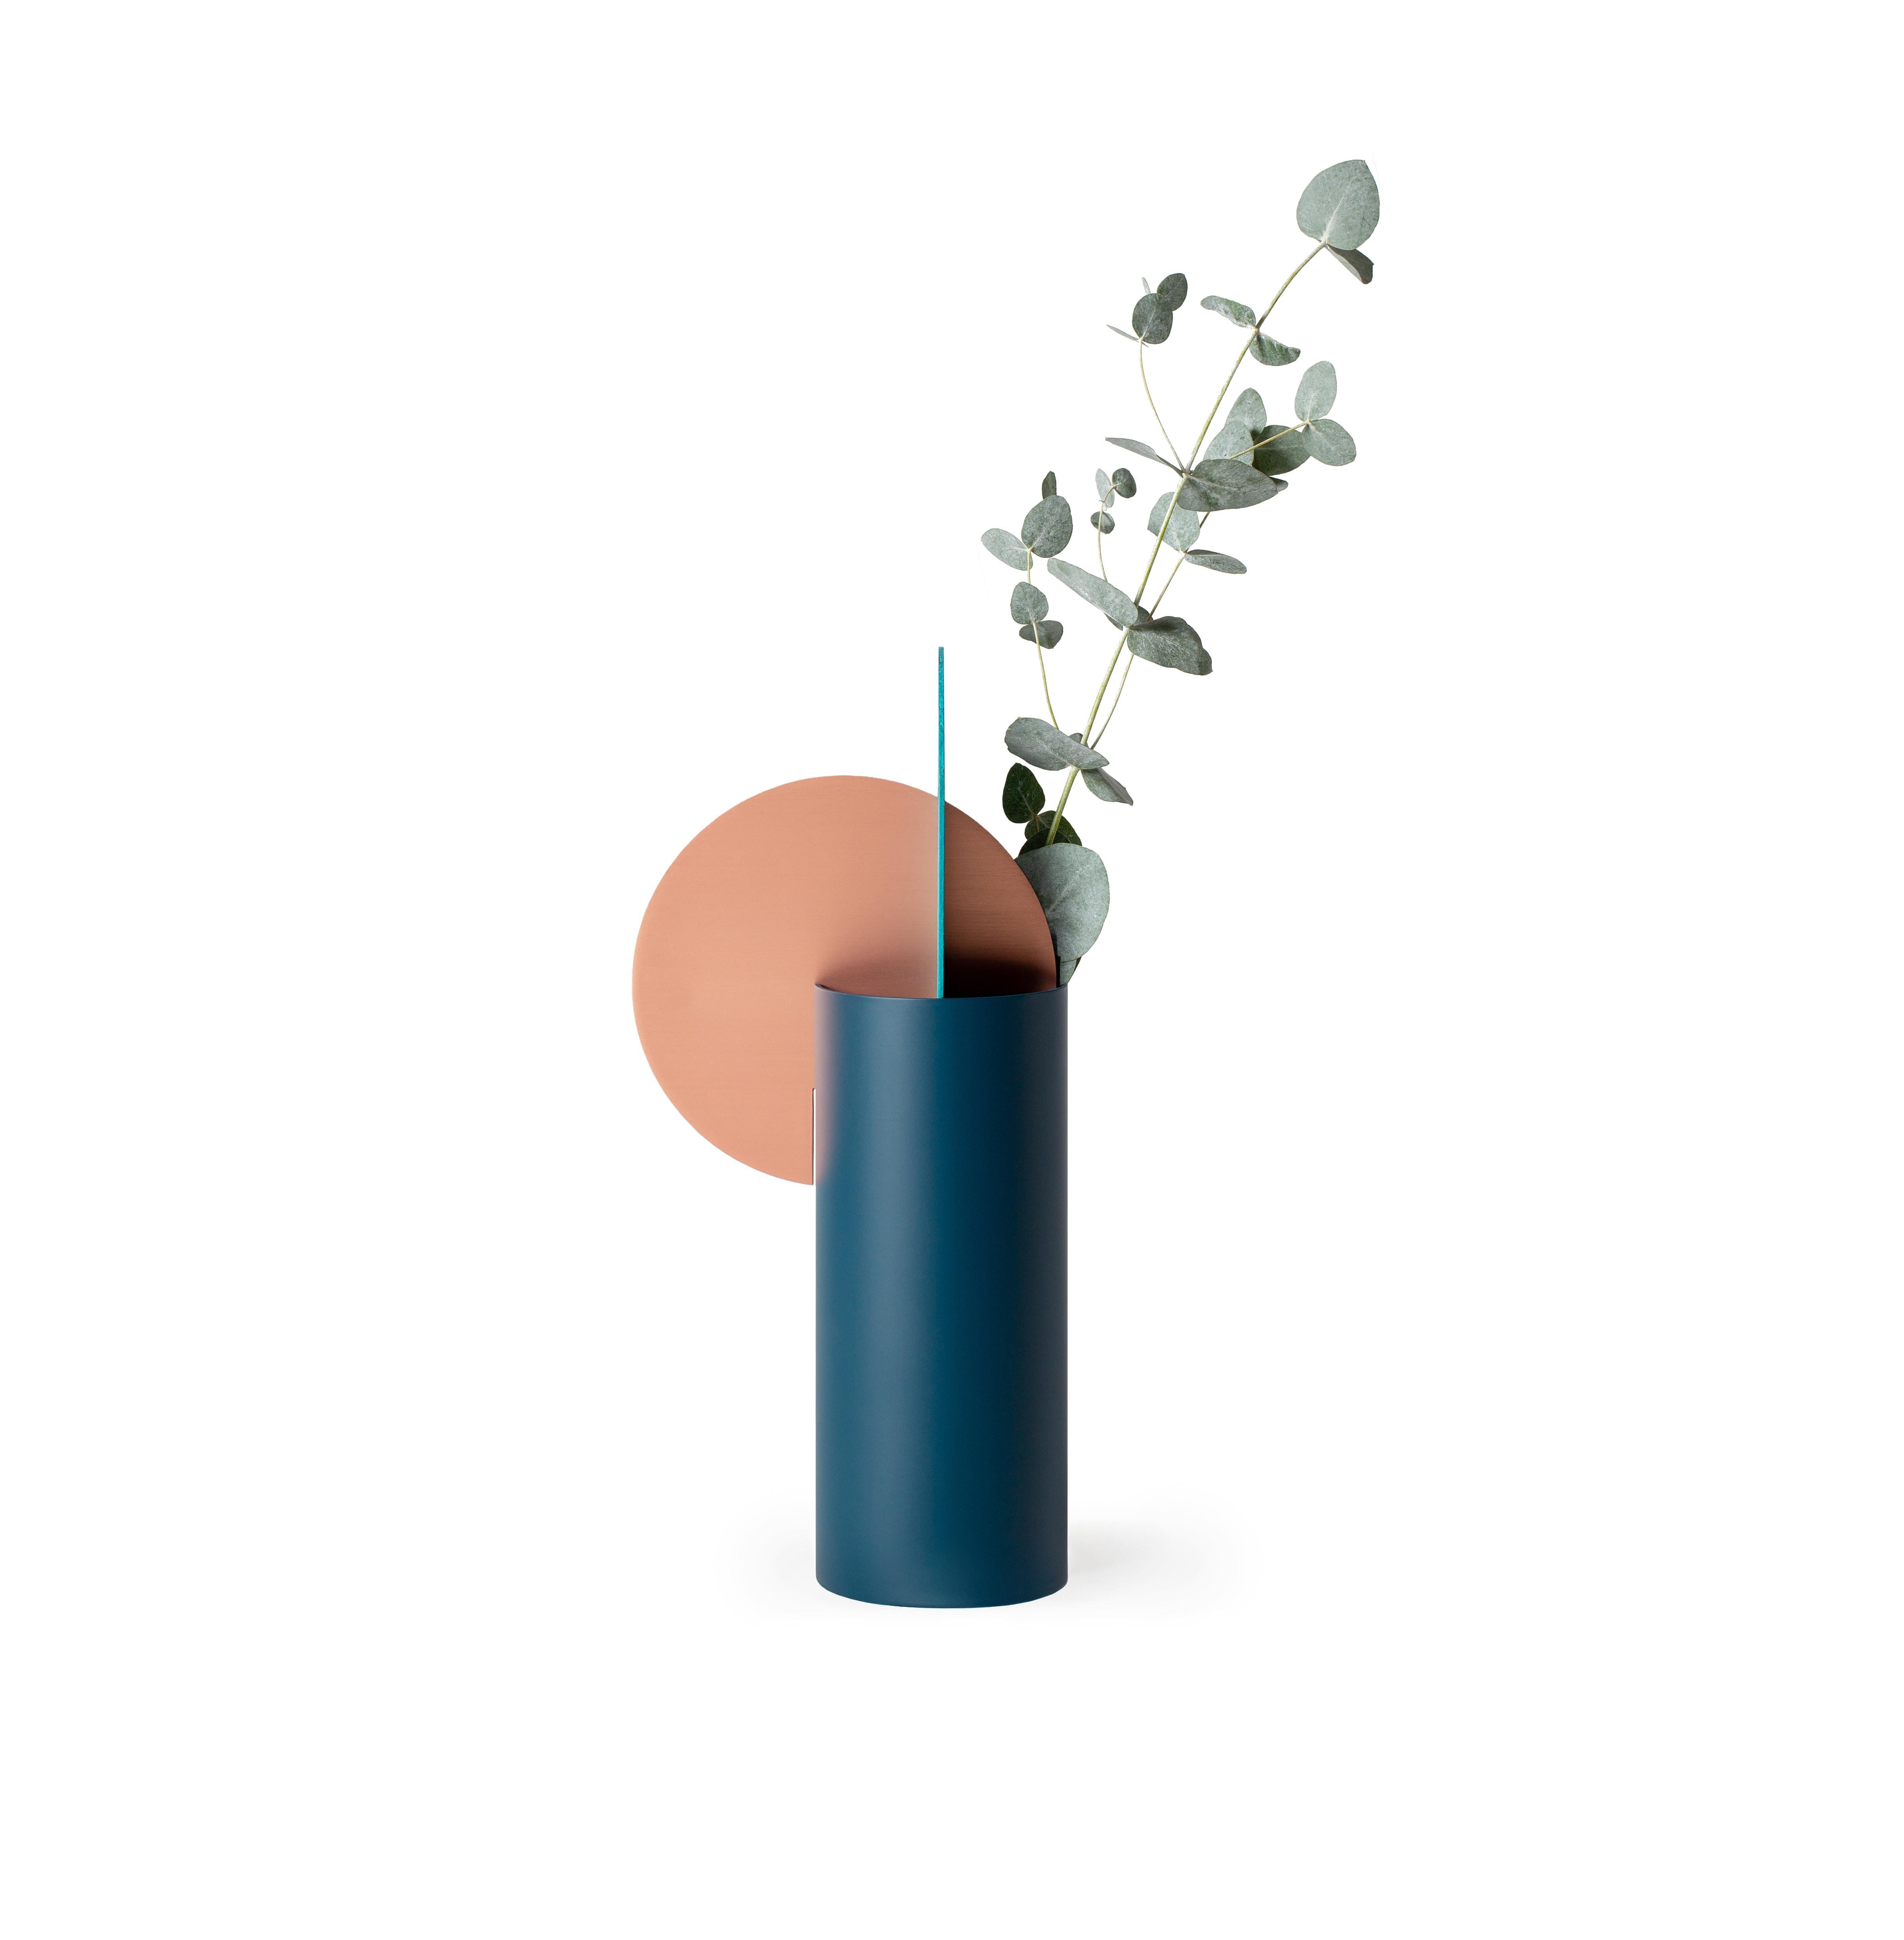 Limited Edition Modern Vase Yermilov CSL2 by NOOM in Oxidized Copper and Steel 2